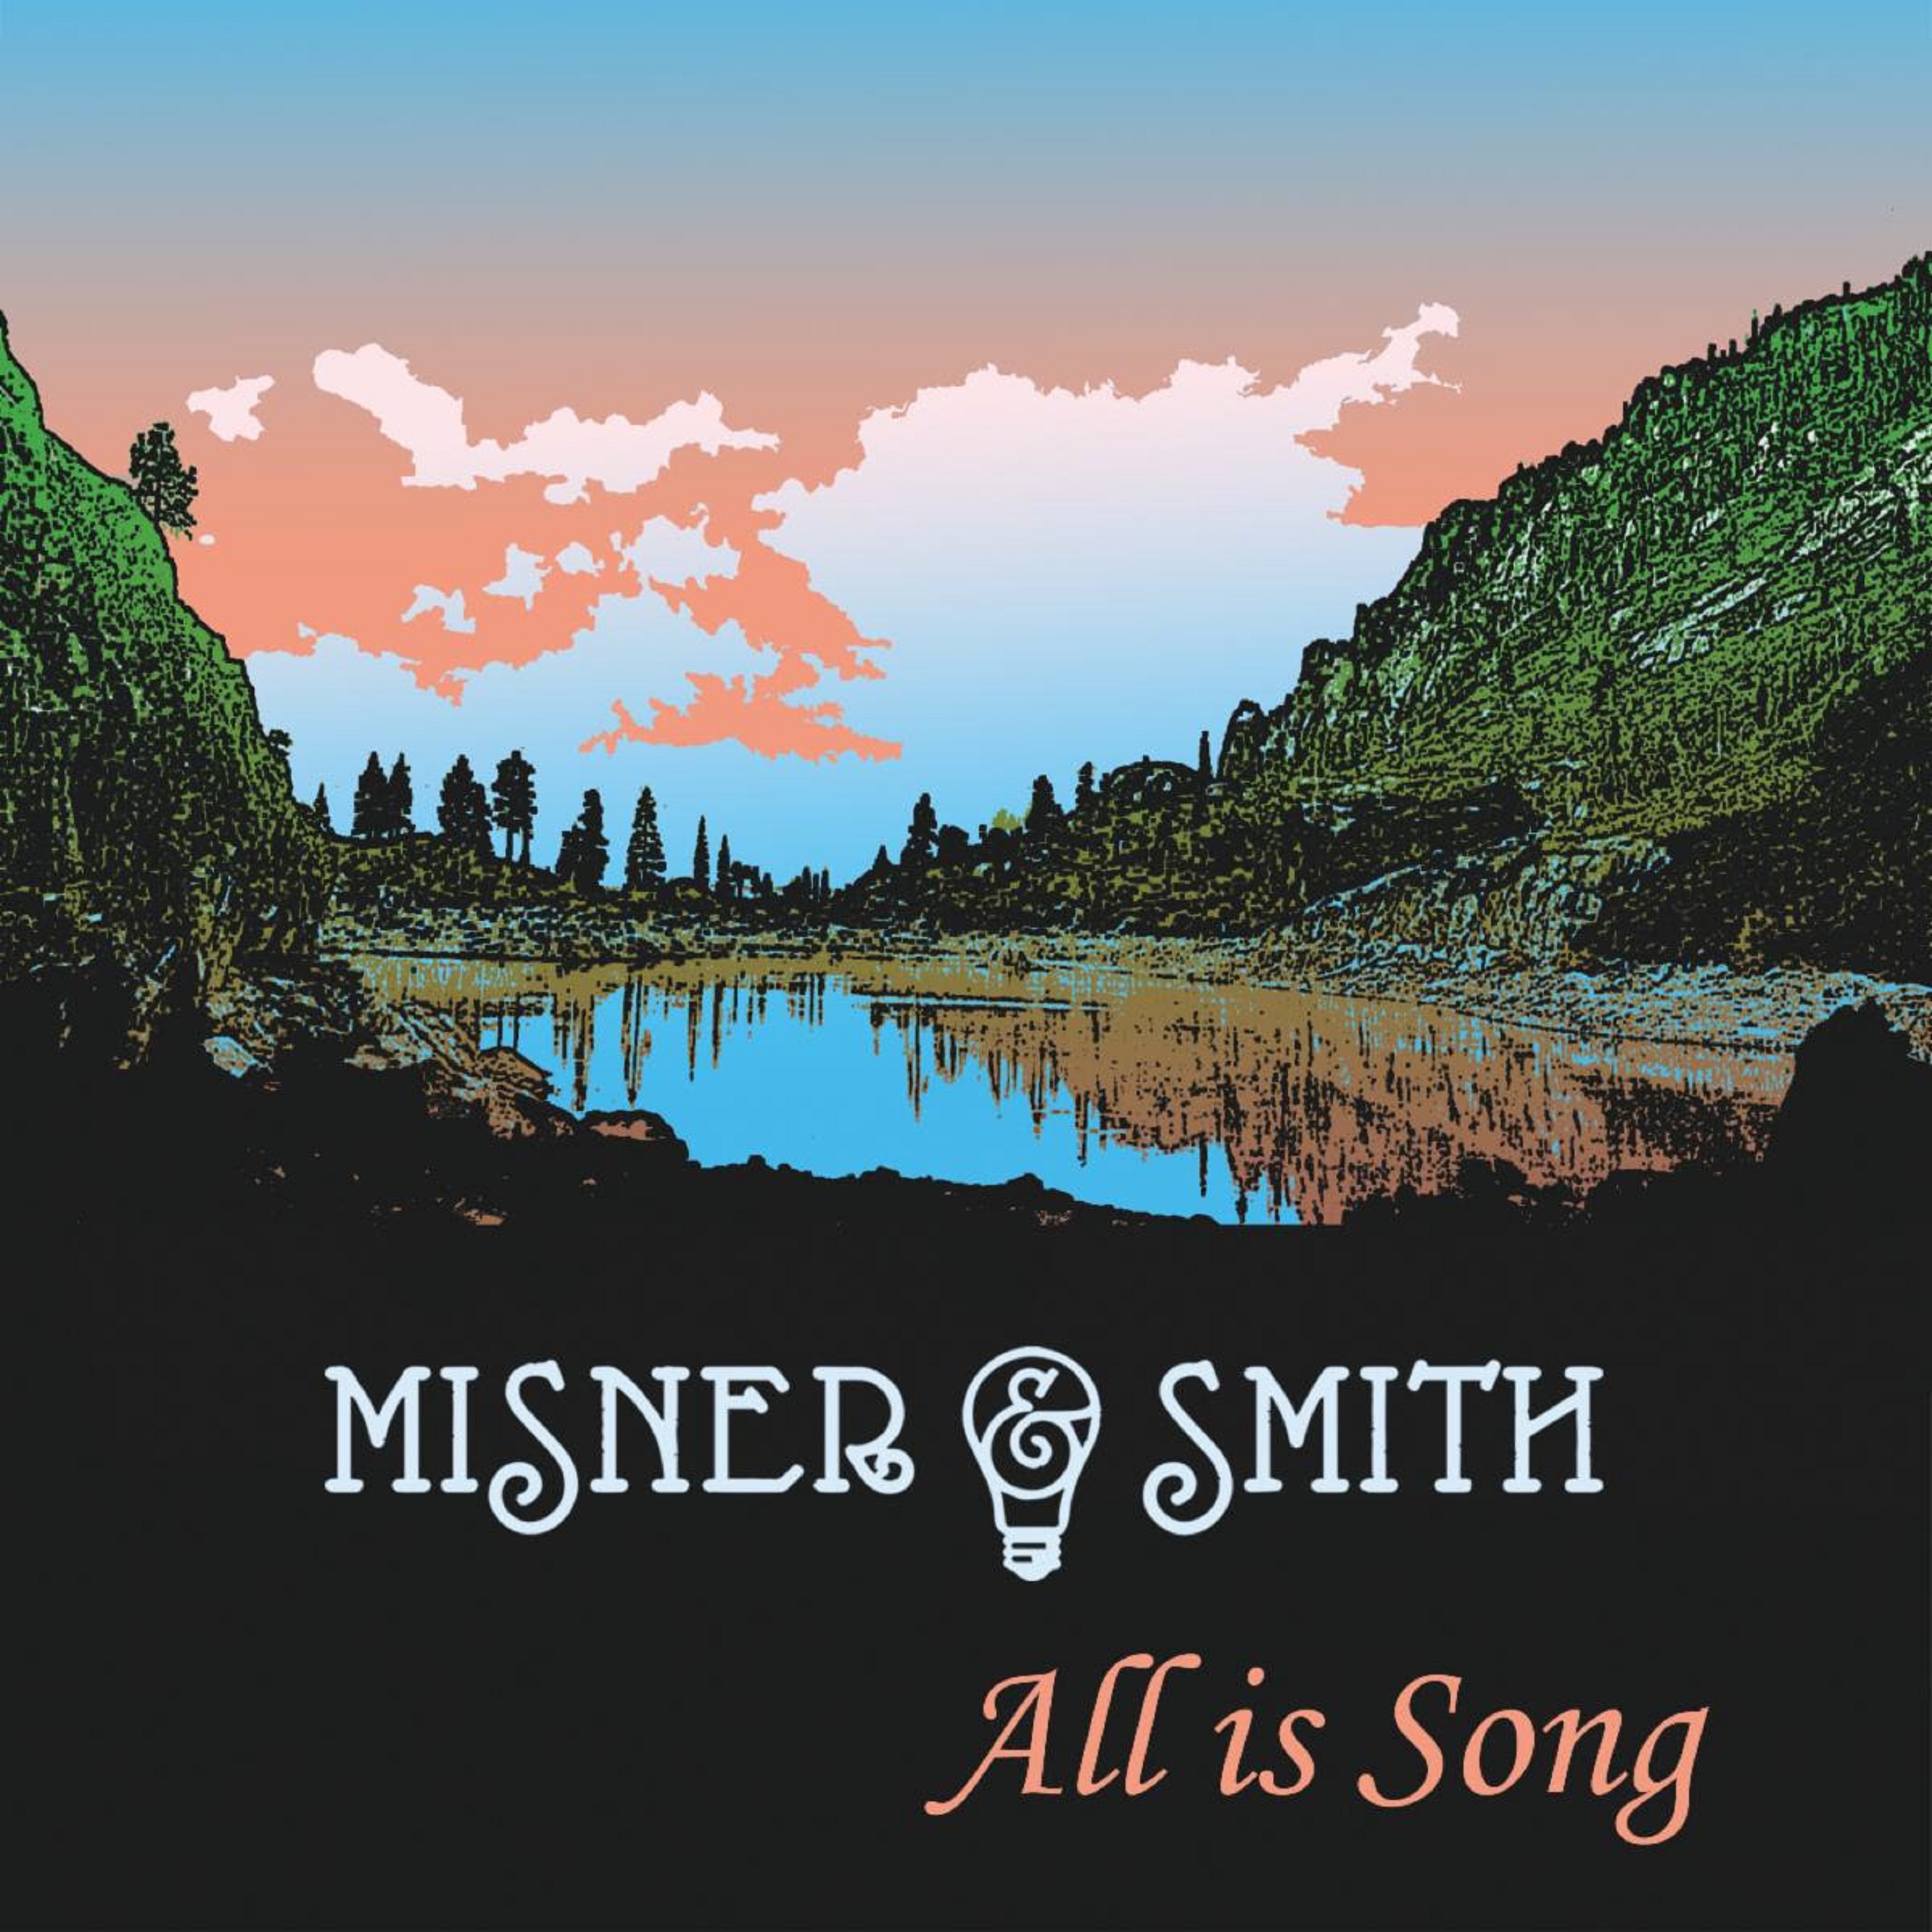 Misner & Smith Announce New Album All is Song With The Musical And Lyrical Optimism Of Lead-Off Single, “Anthem”